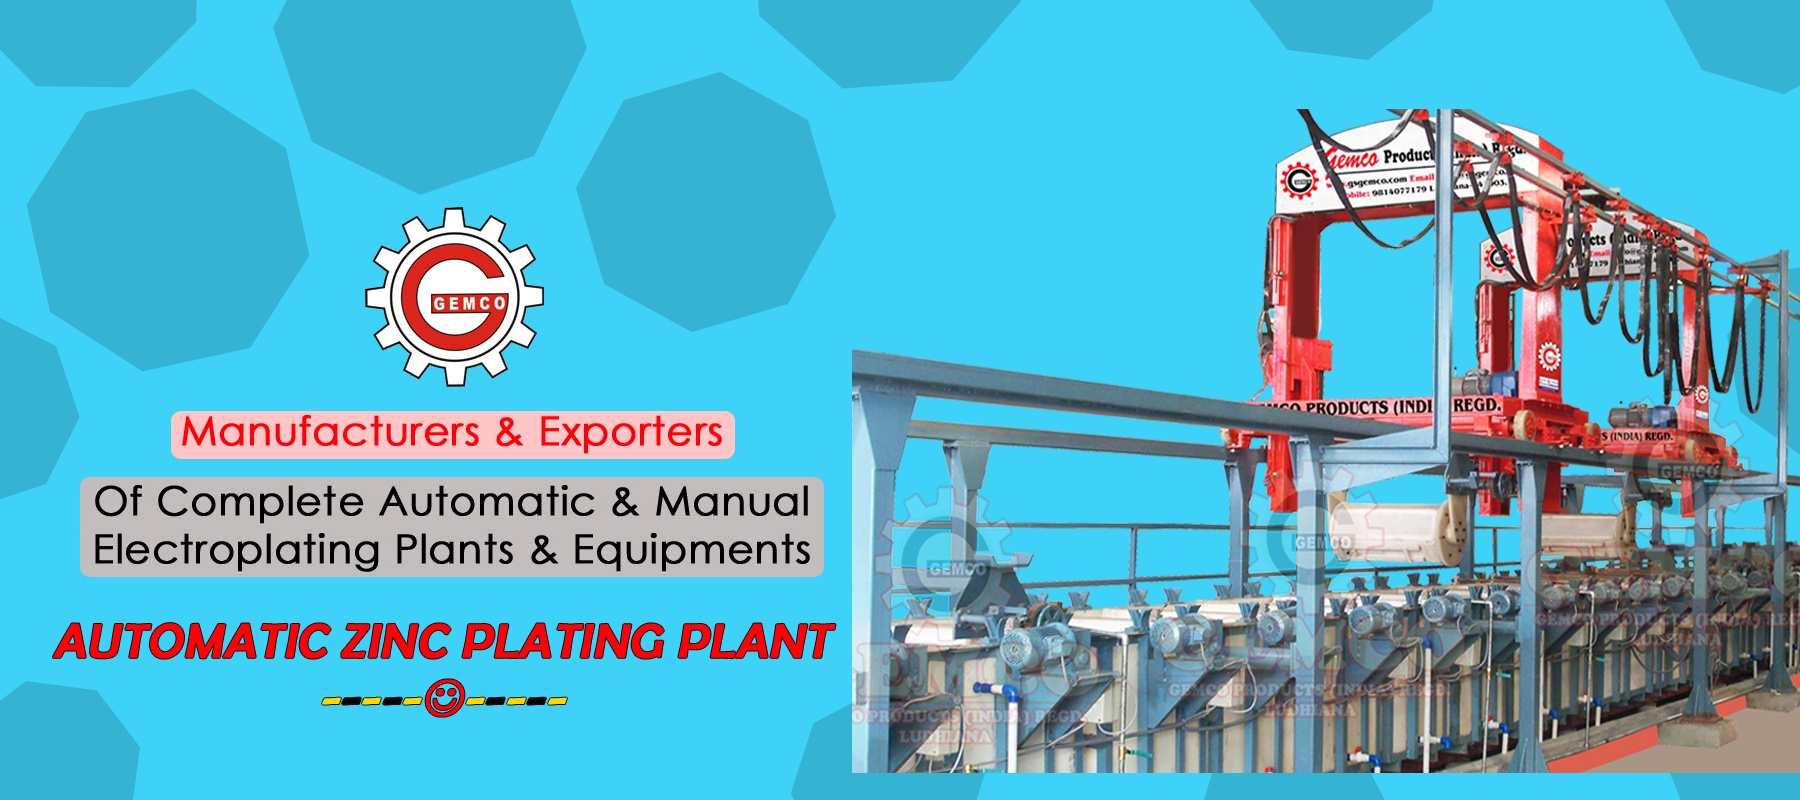 AUTOMATIC ELECTROPLATING PLANT